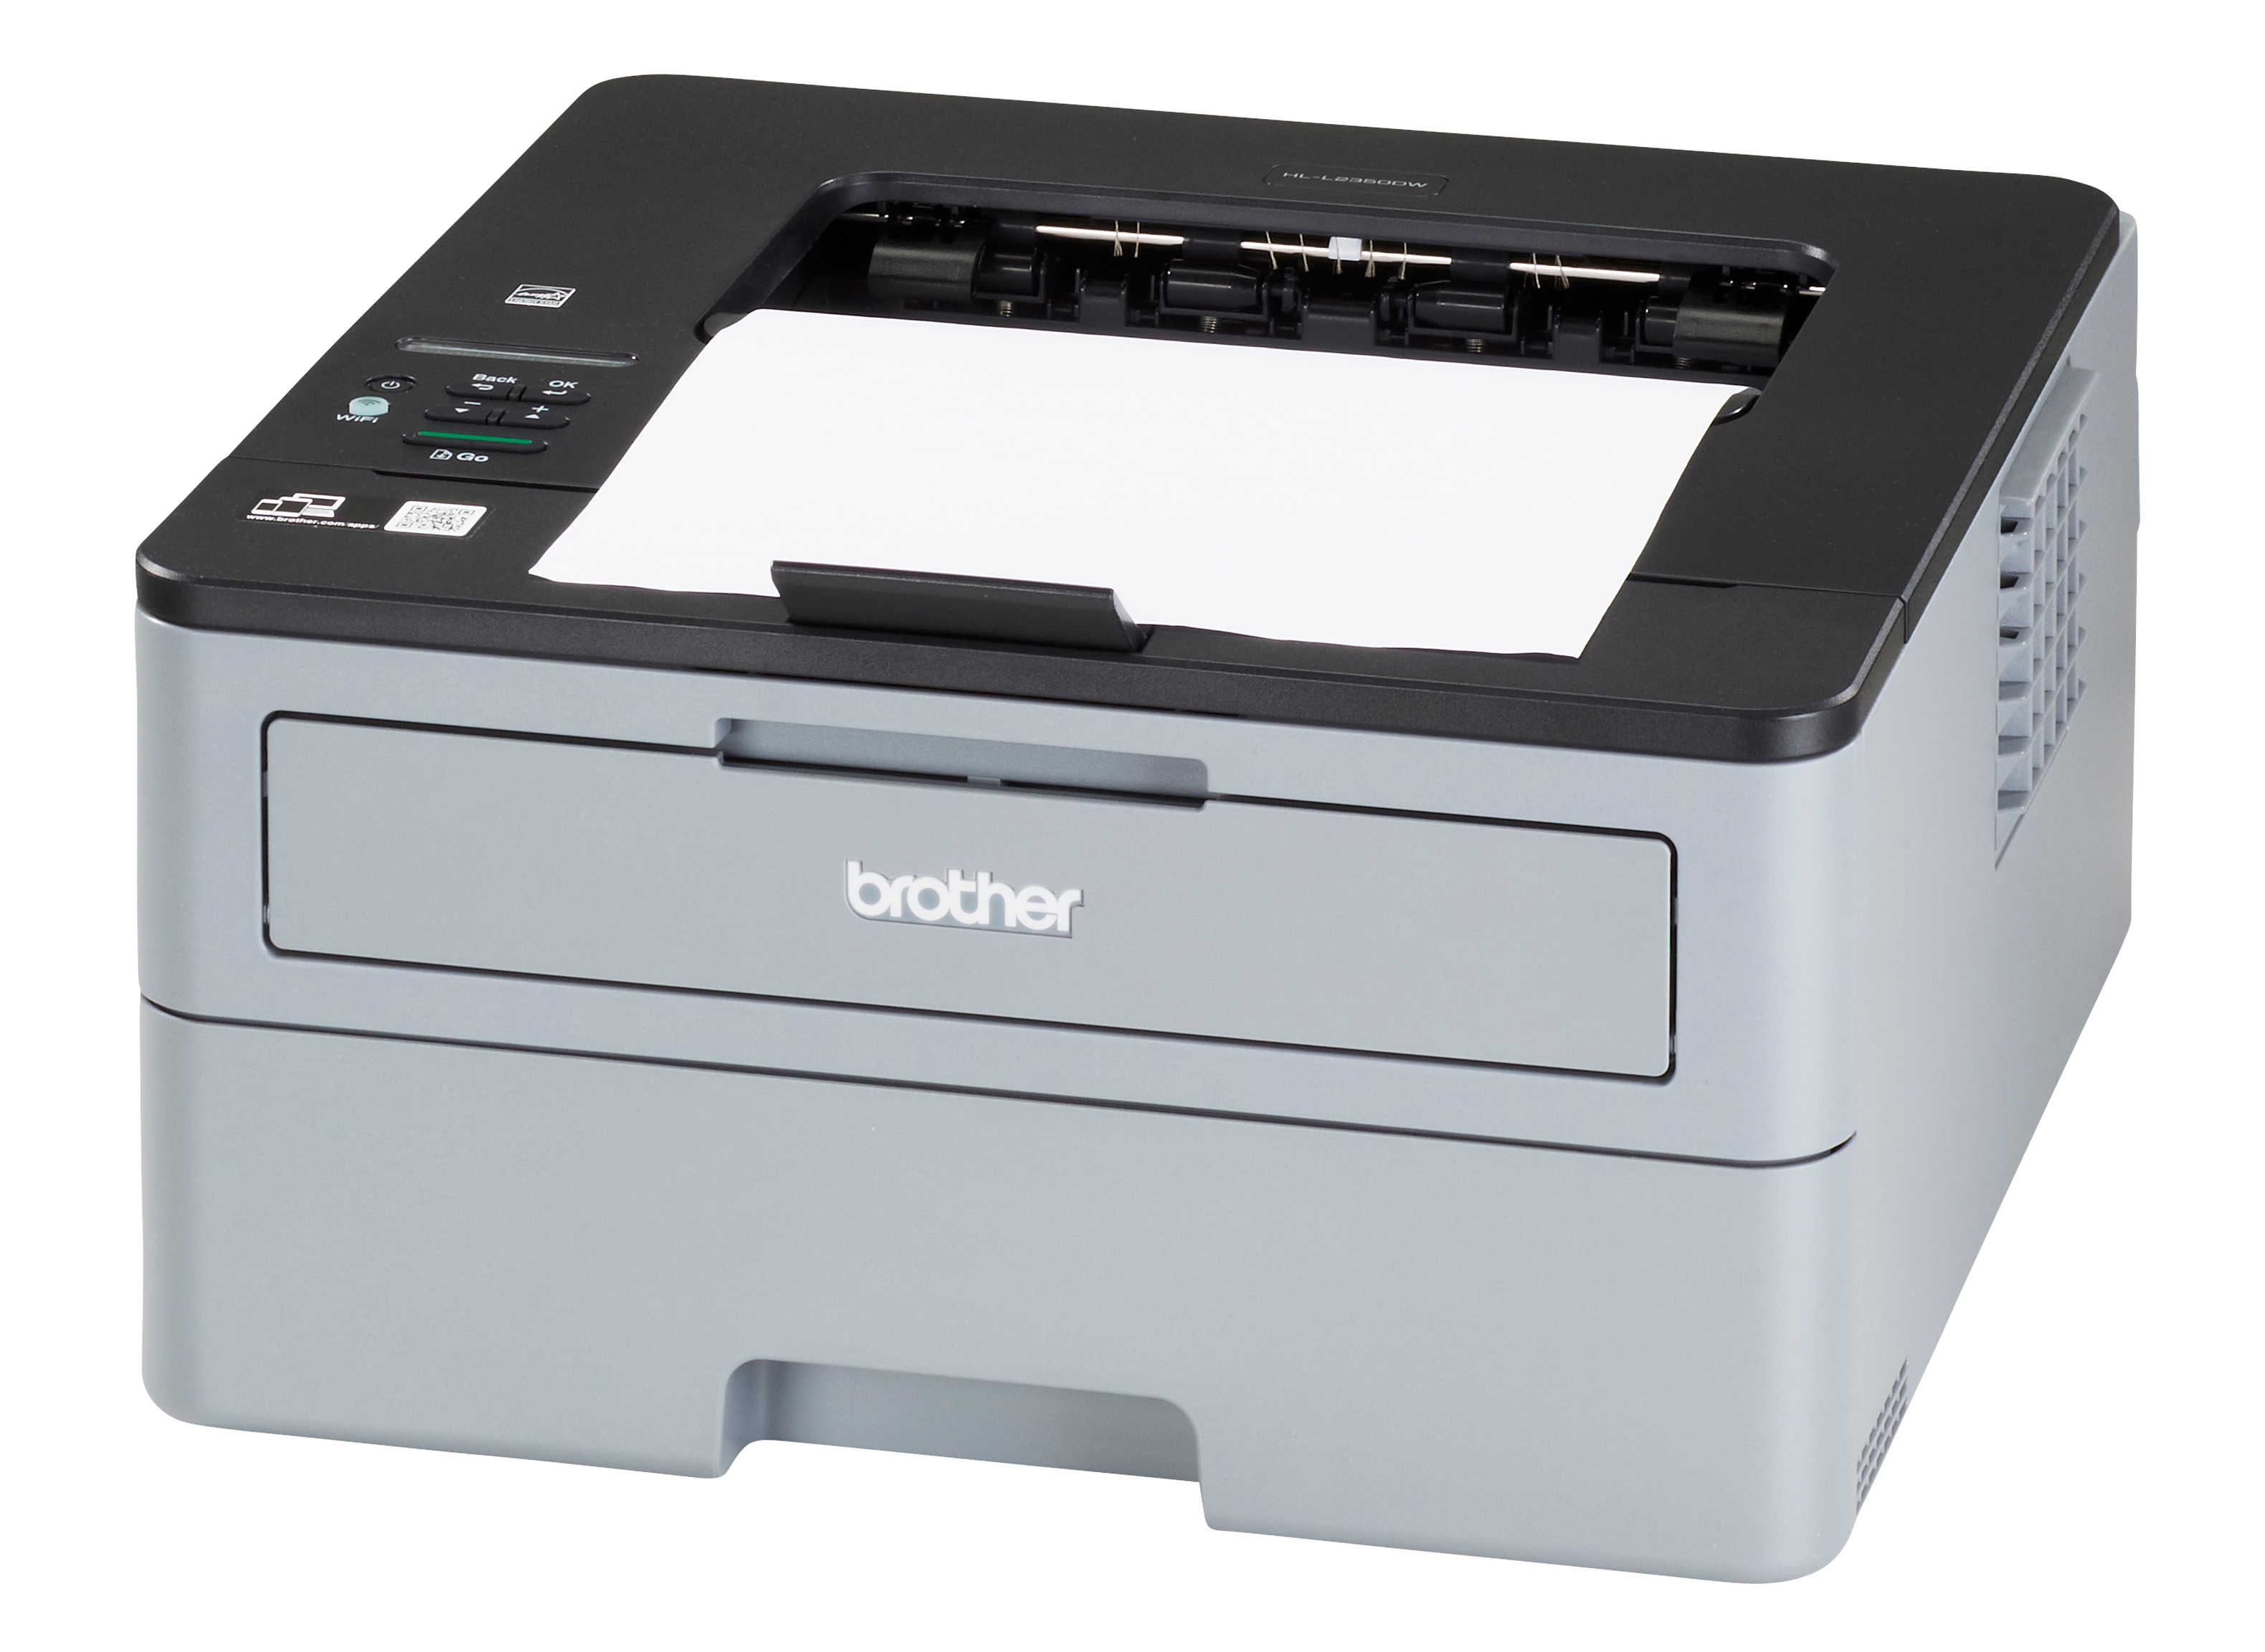 Brother HL-L2350DW Printer Review - Consumer Reports